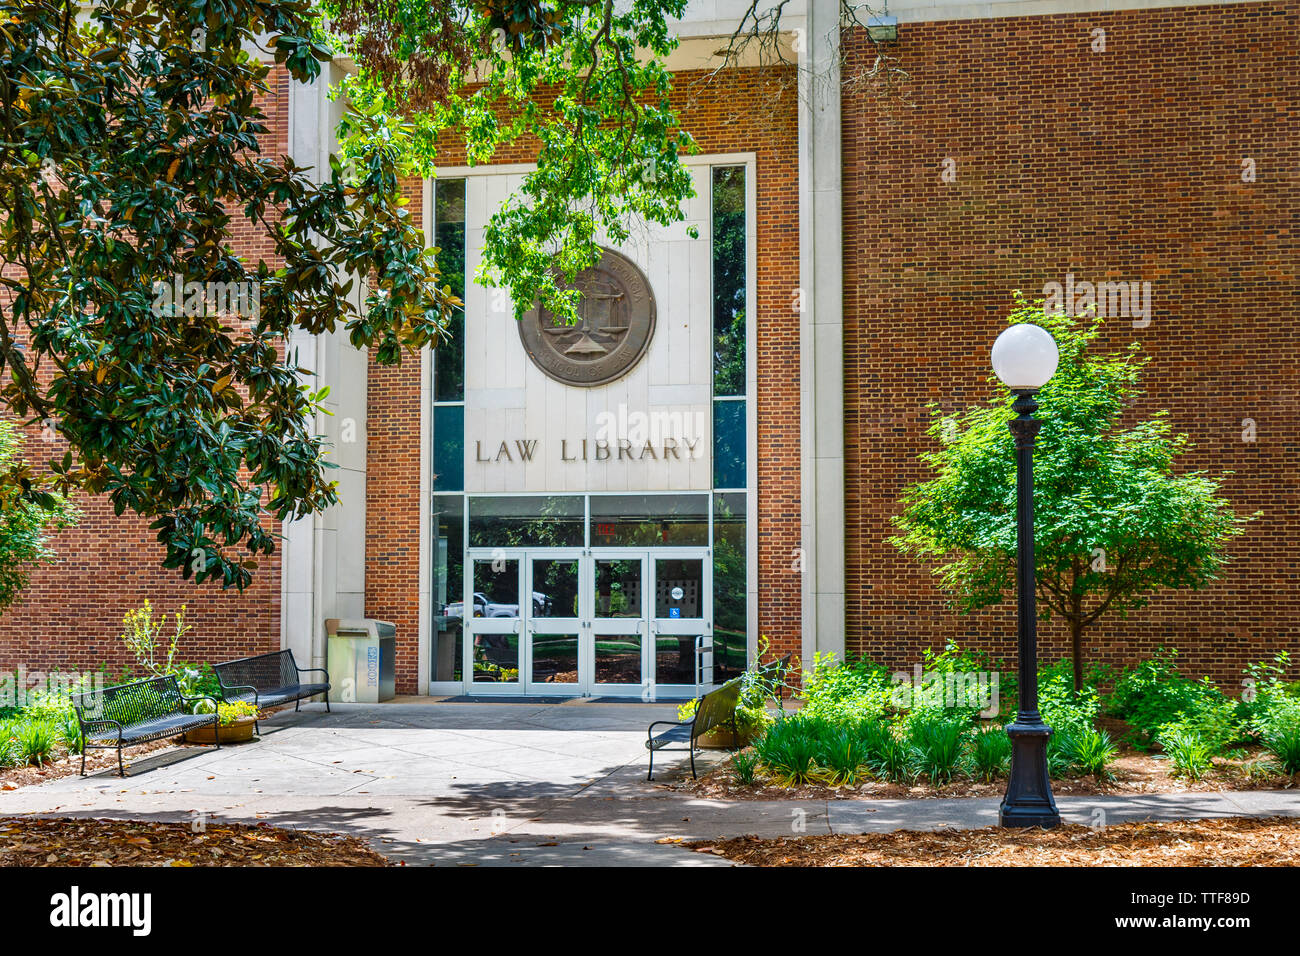 ATHENS, GA, USA - May 3: Alexander Campbell King Law Library on May 3, 2019 at the University of Georgia, North Campus in Athens, Georgia. Stock Photo